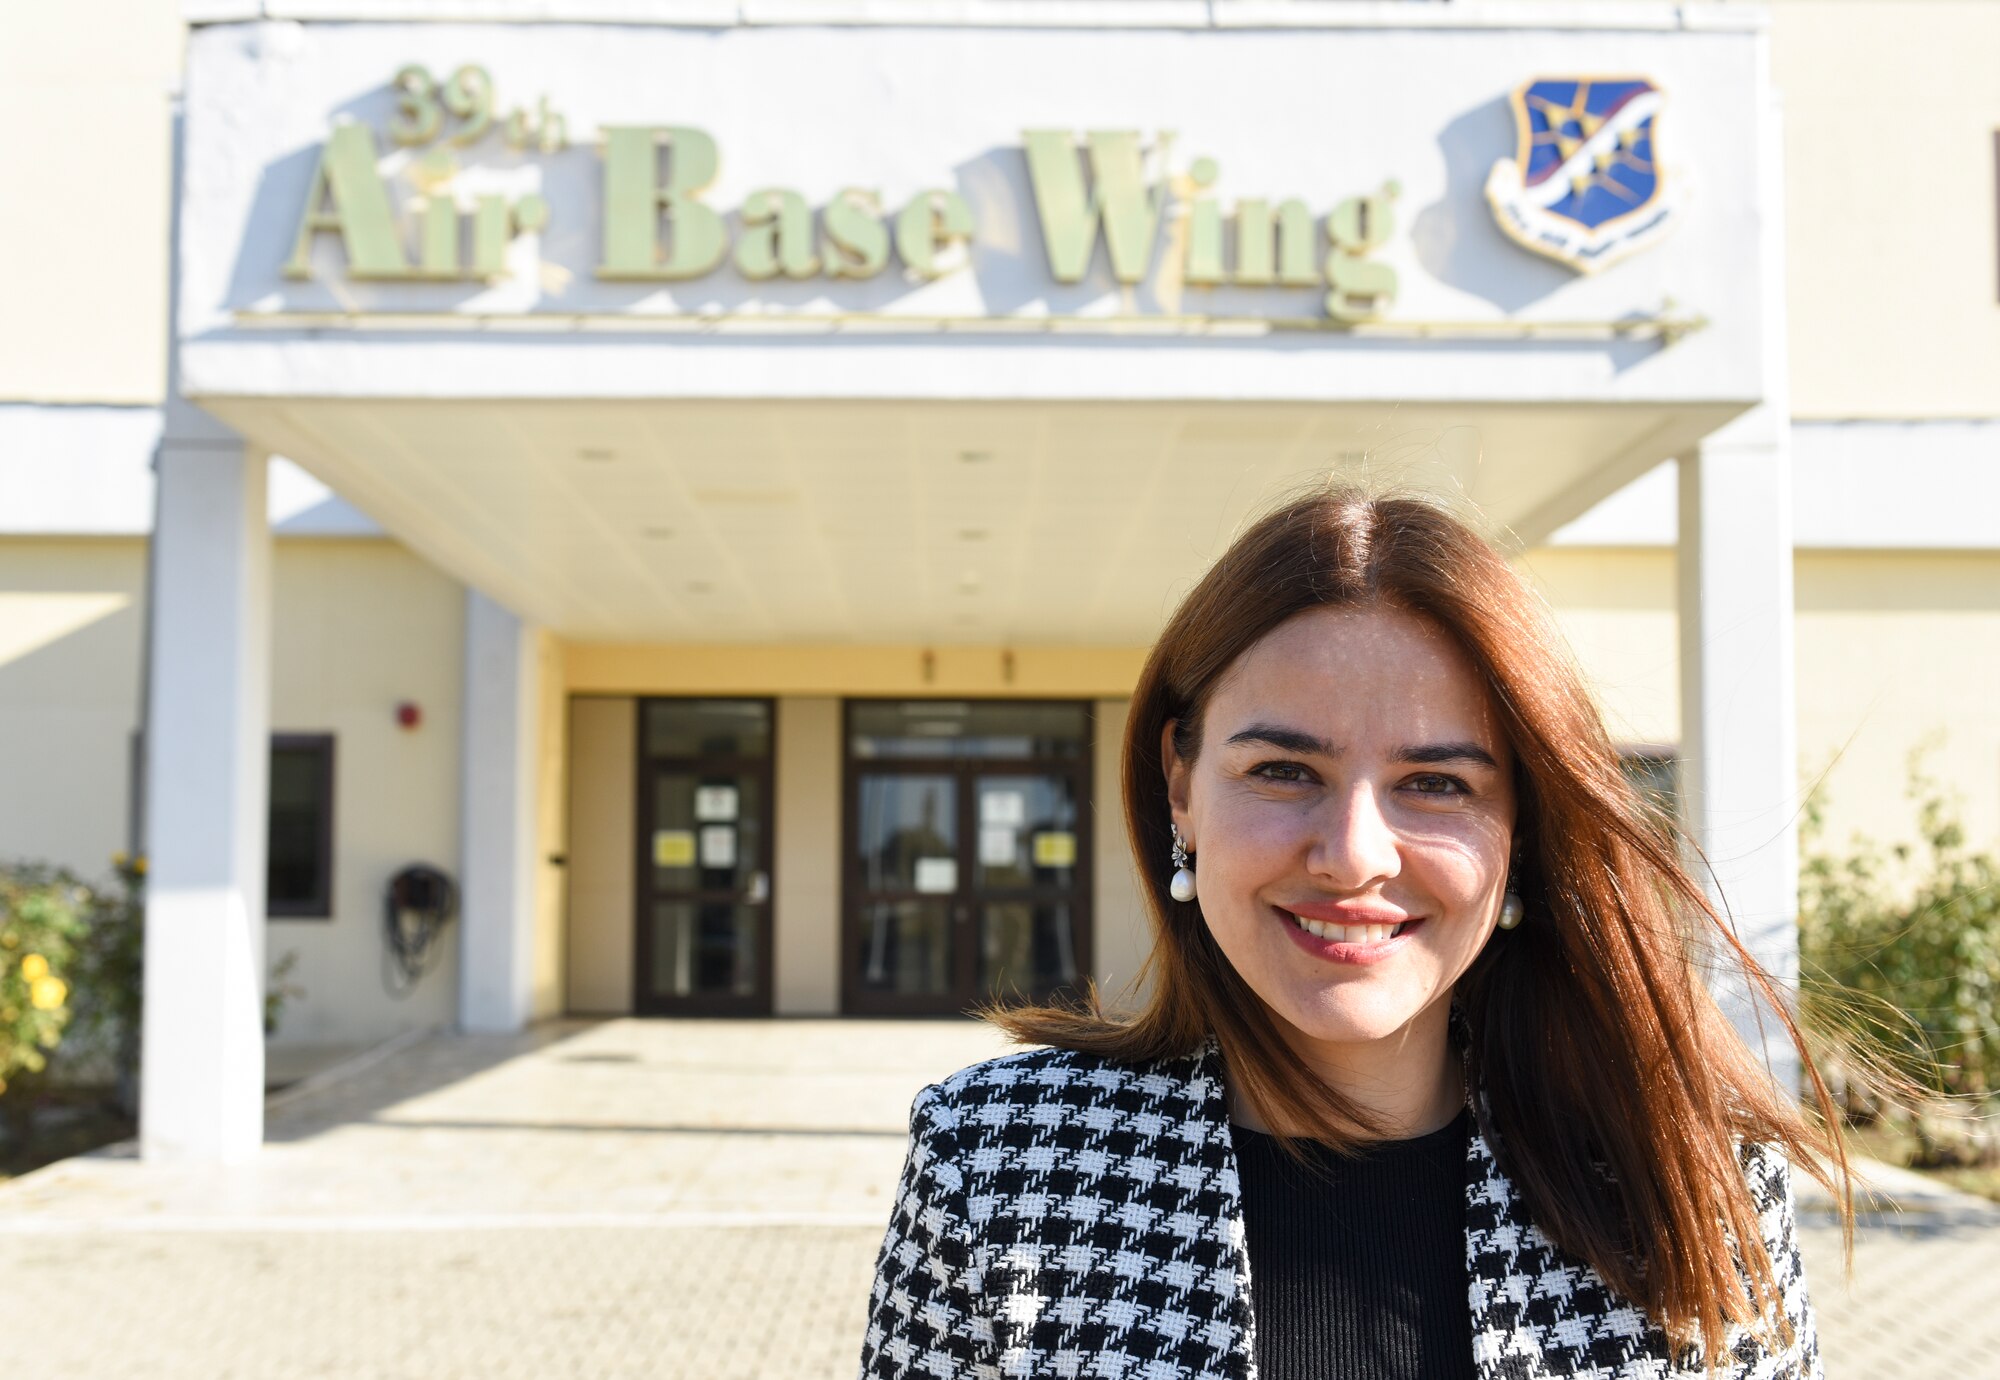 Zeynep Alaybeyoğlu is a Turkish translator, interpreter and administrative assistant for the 39th Air Base Wing